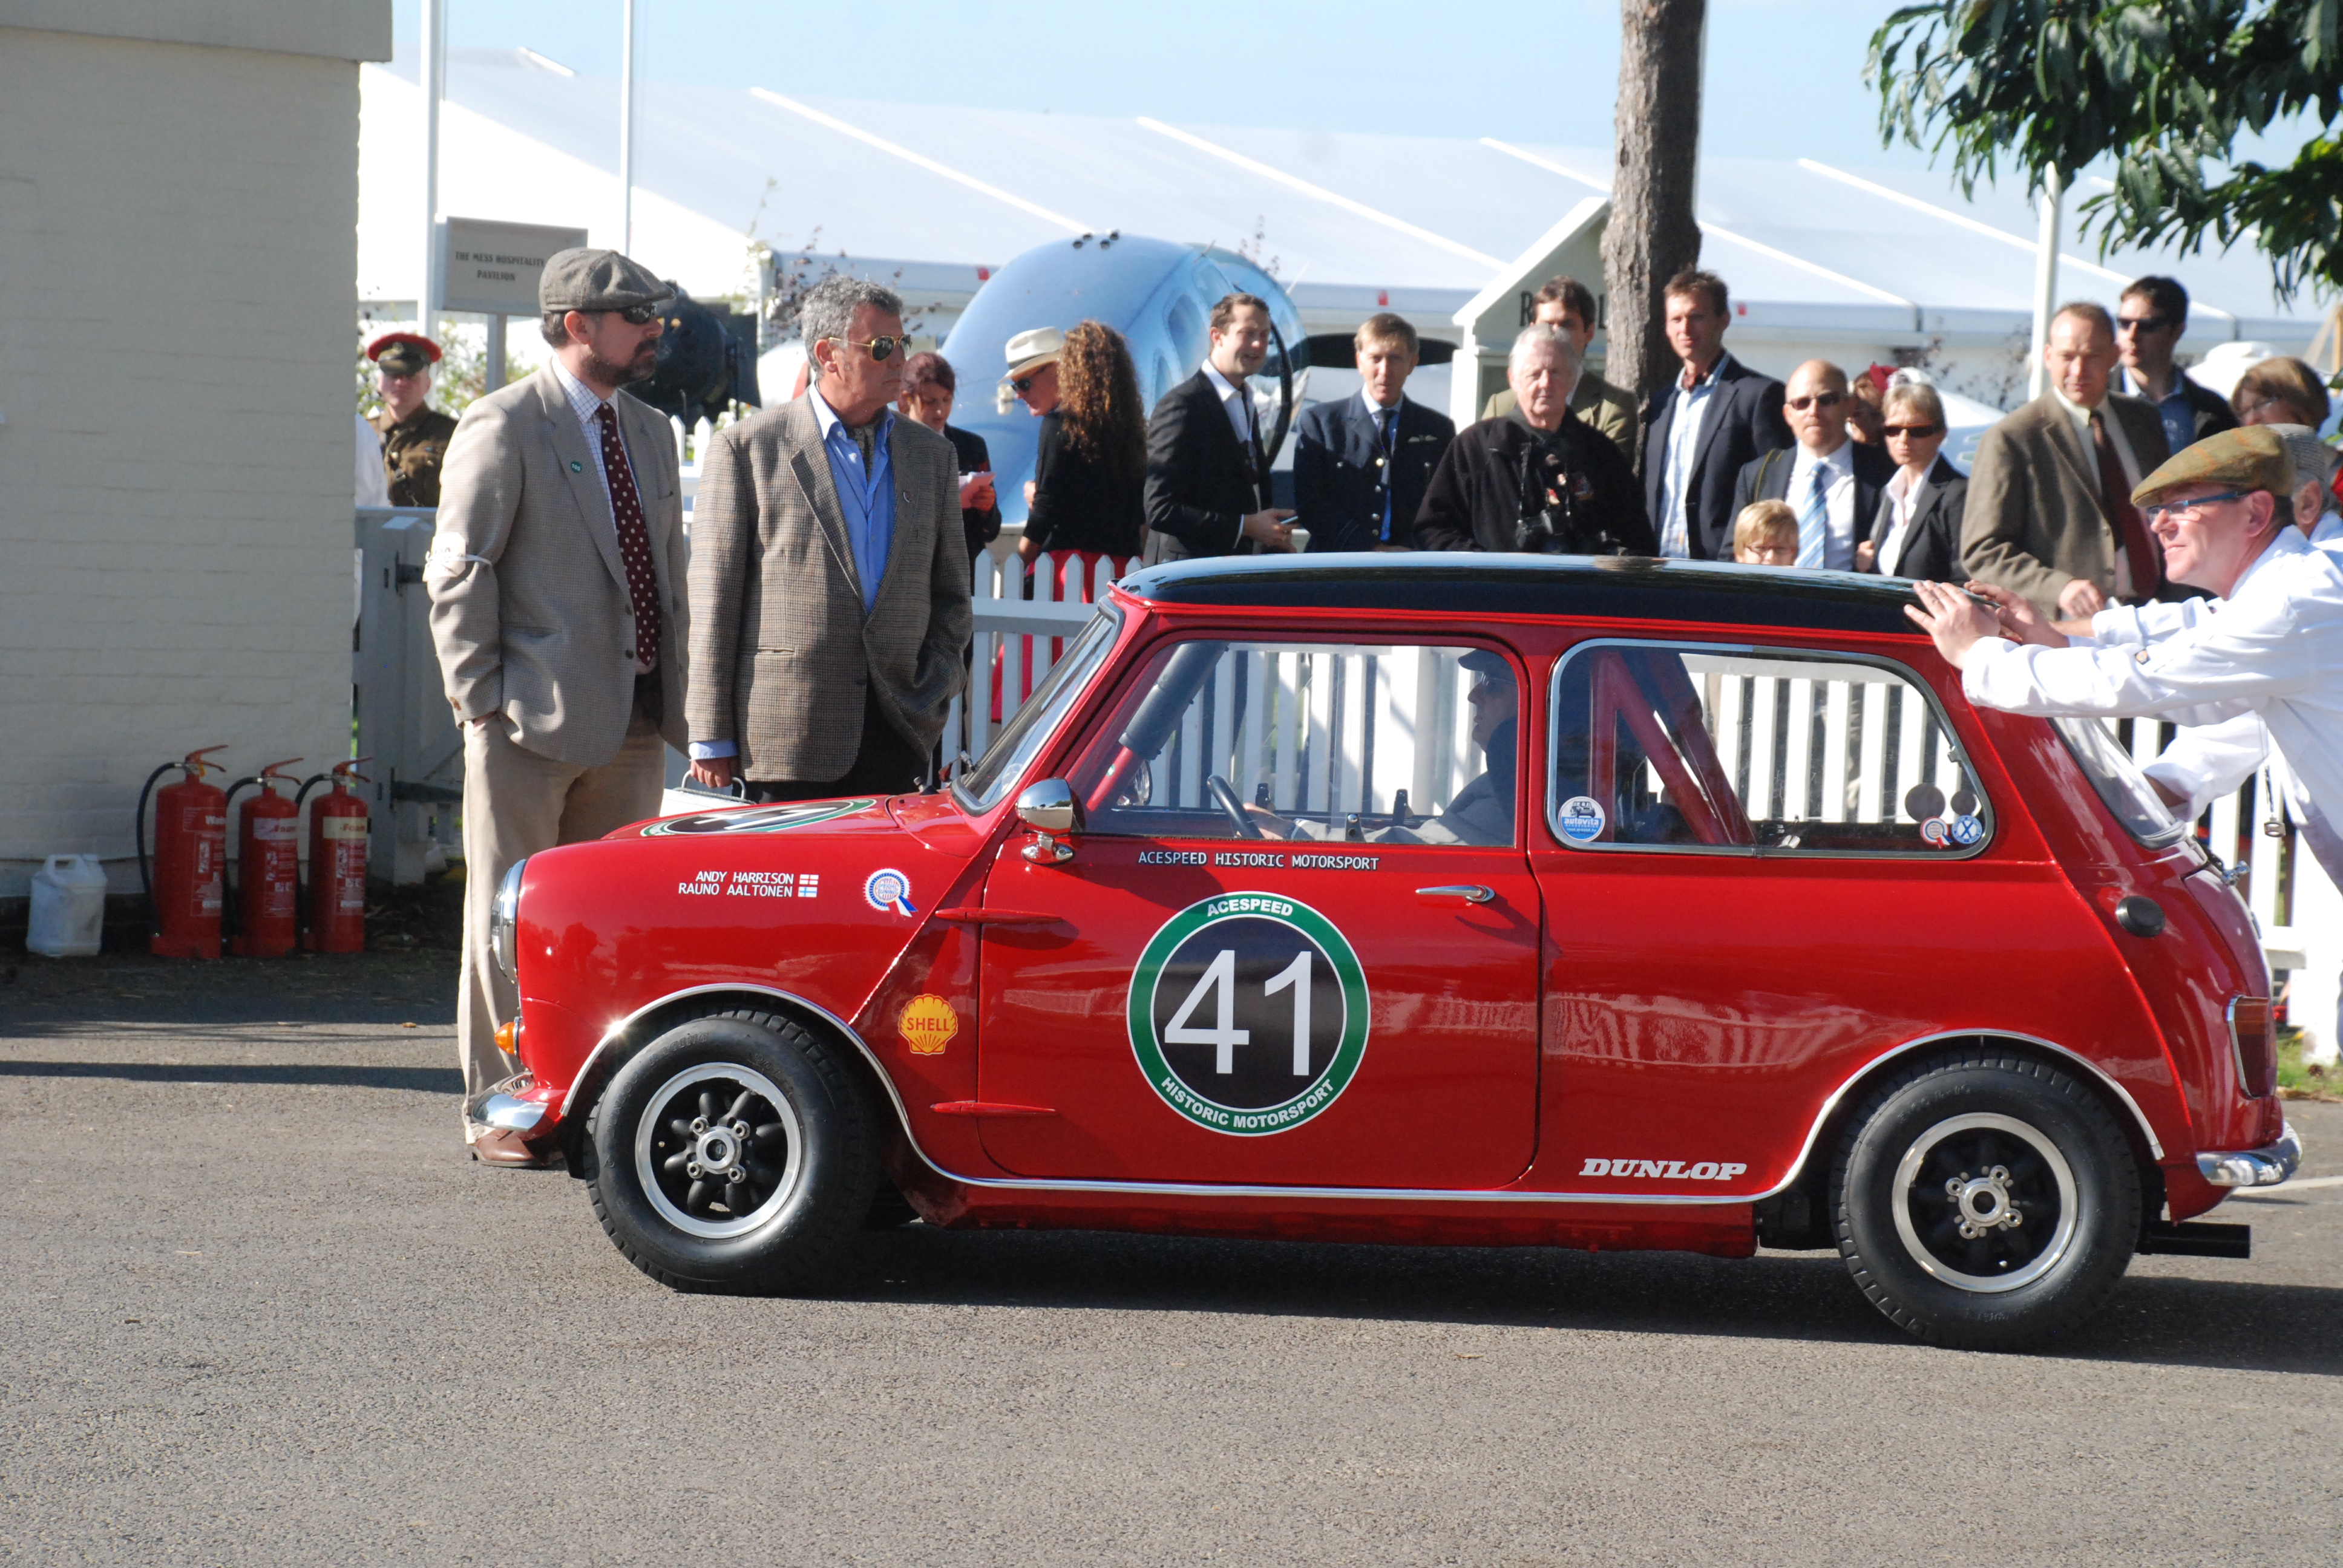 Austin Mini Cooper S - St. Mary's Trophy | Flickr - Photo Sharing!